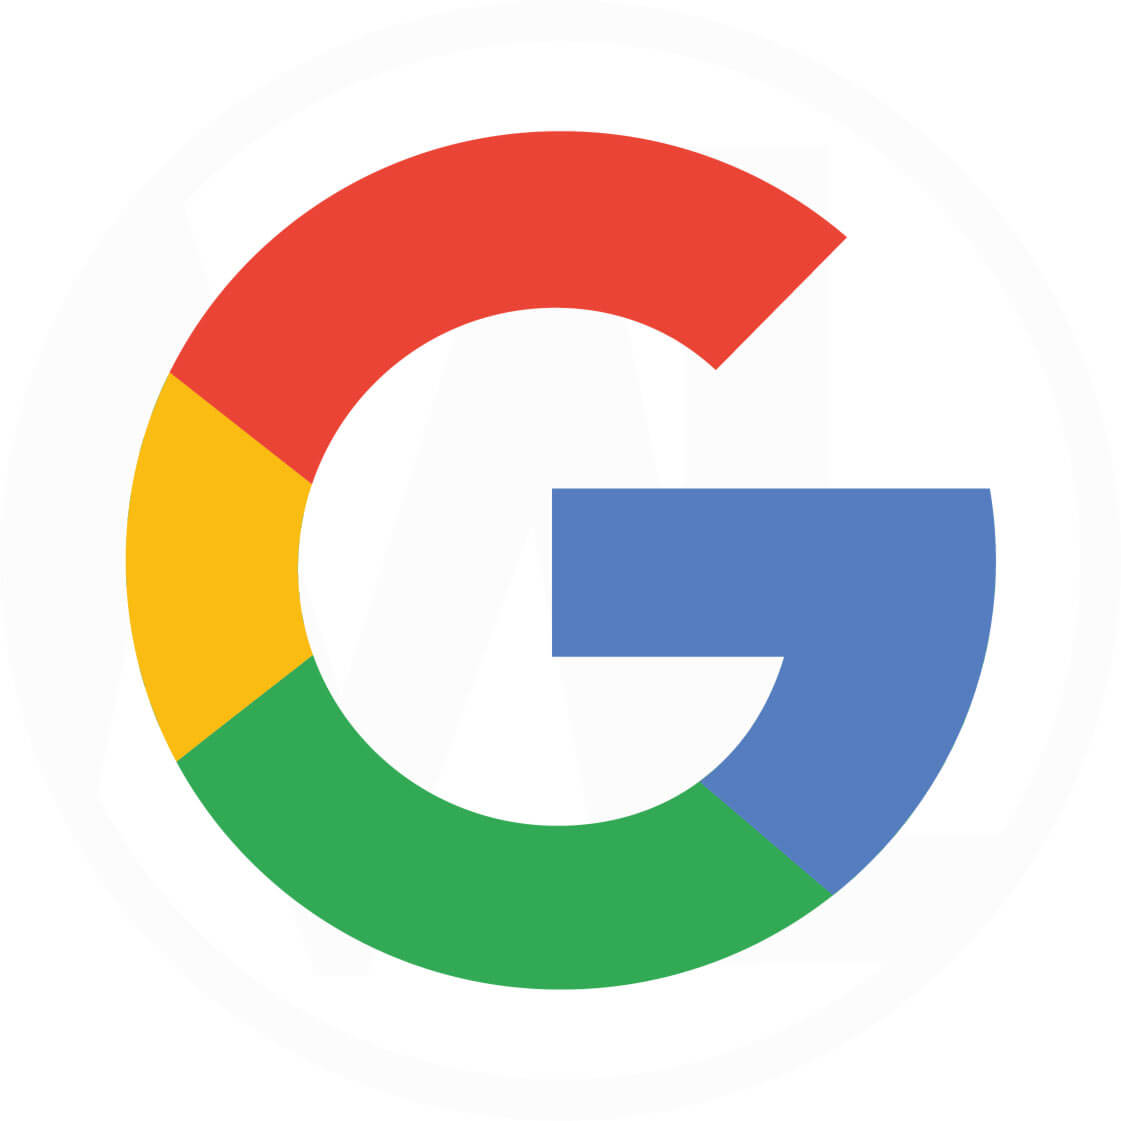 Google Beta of Google Search App - Project Management and Development